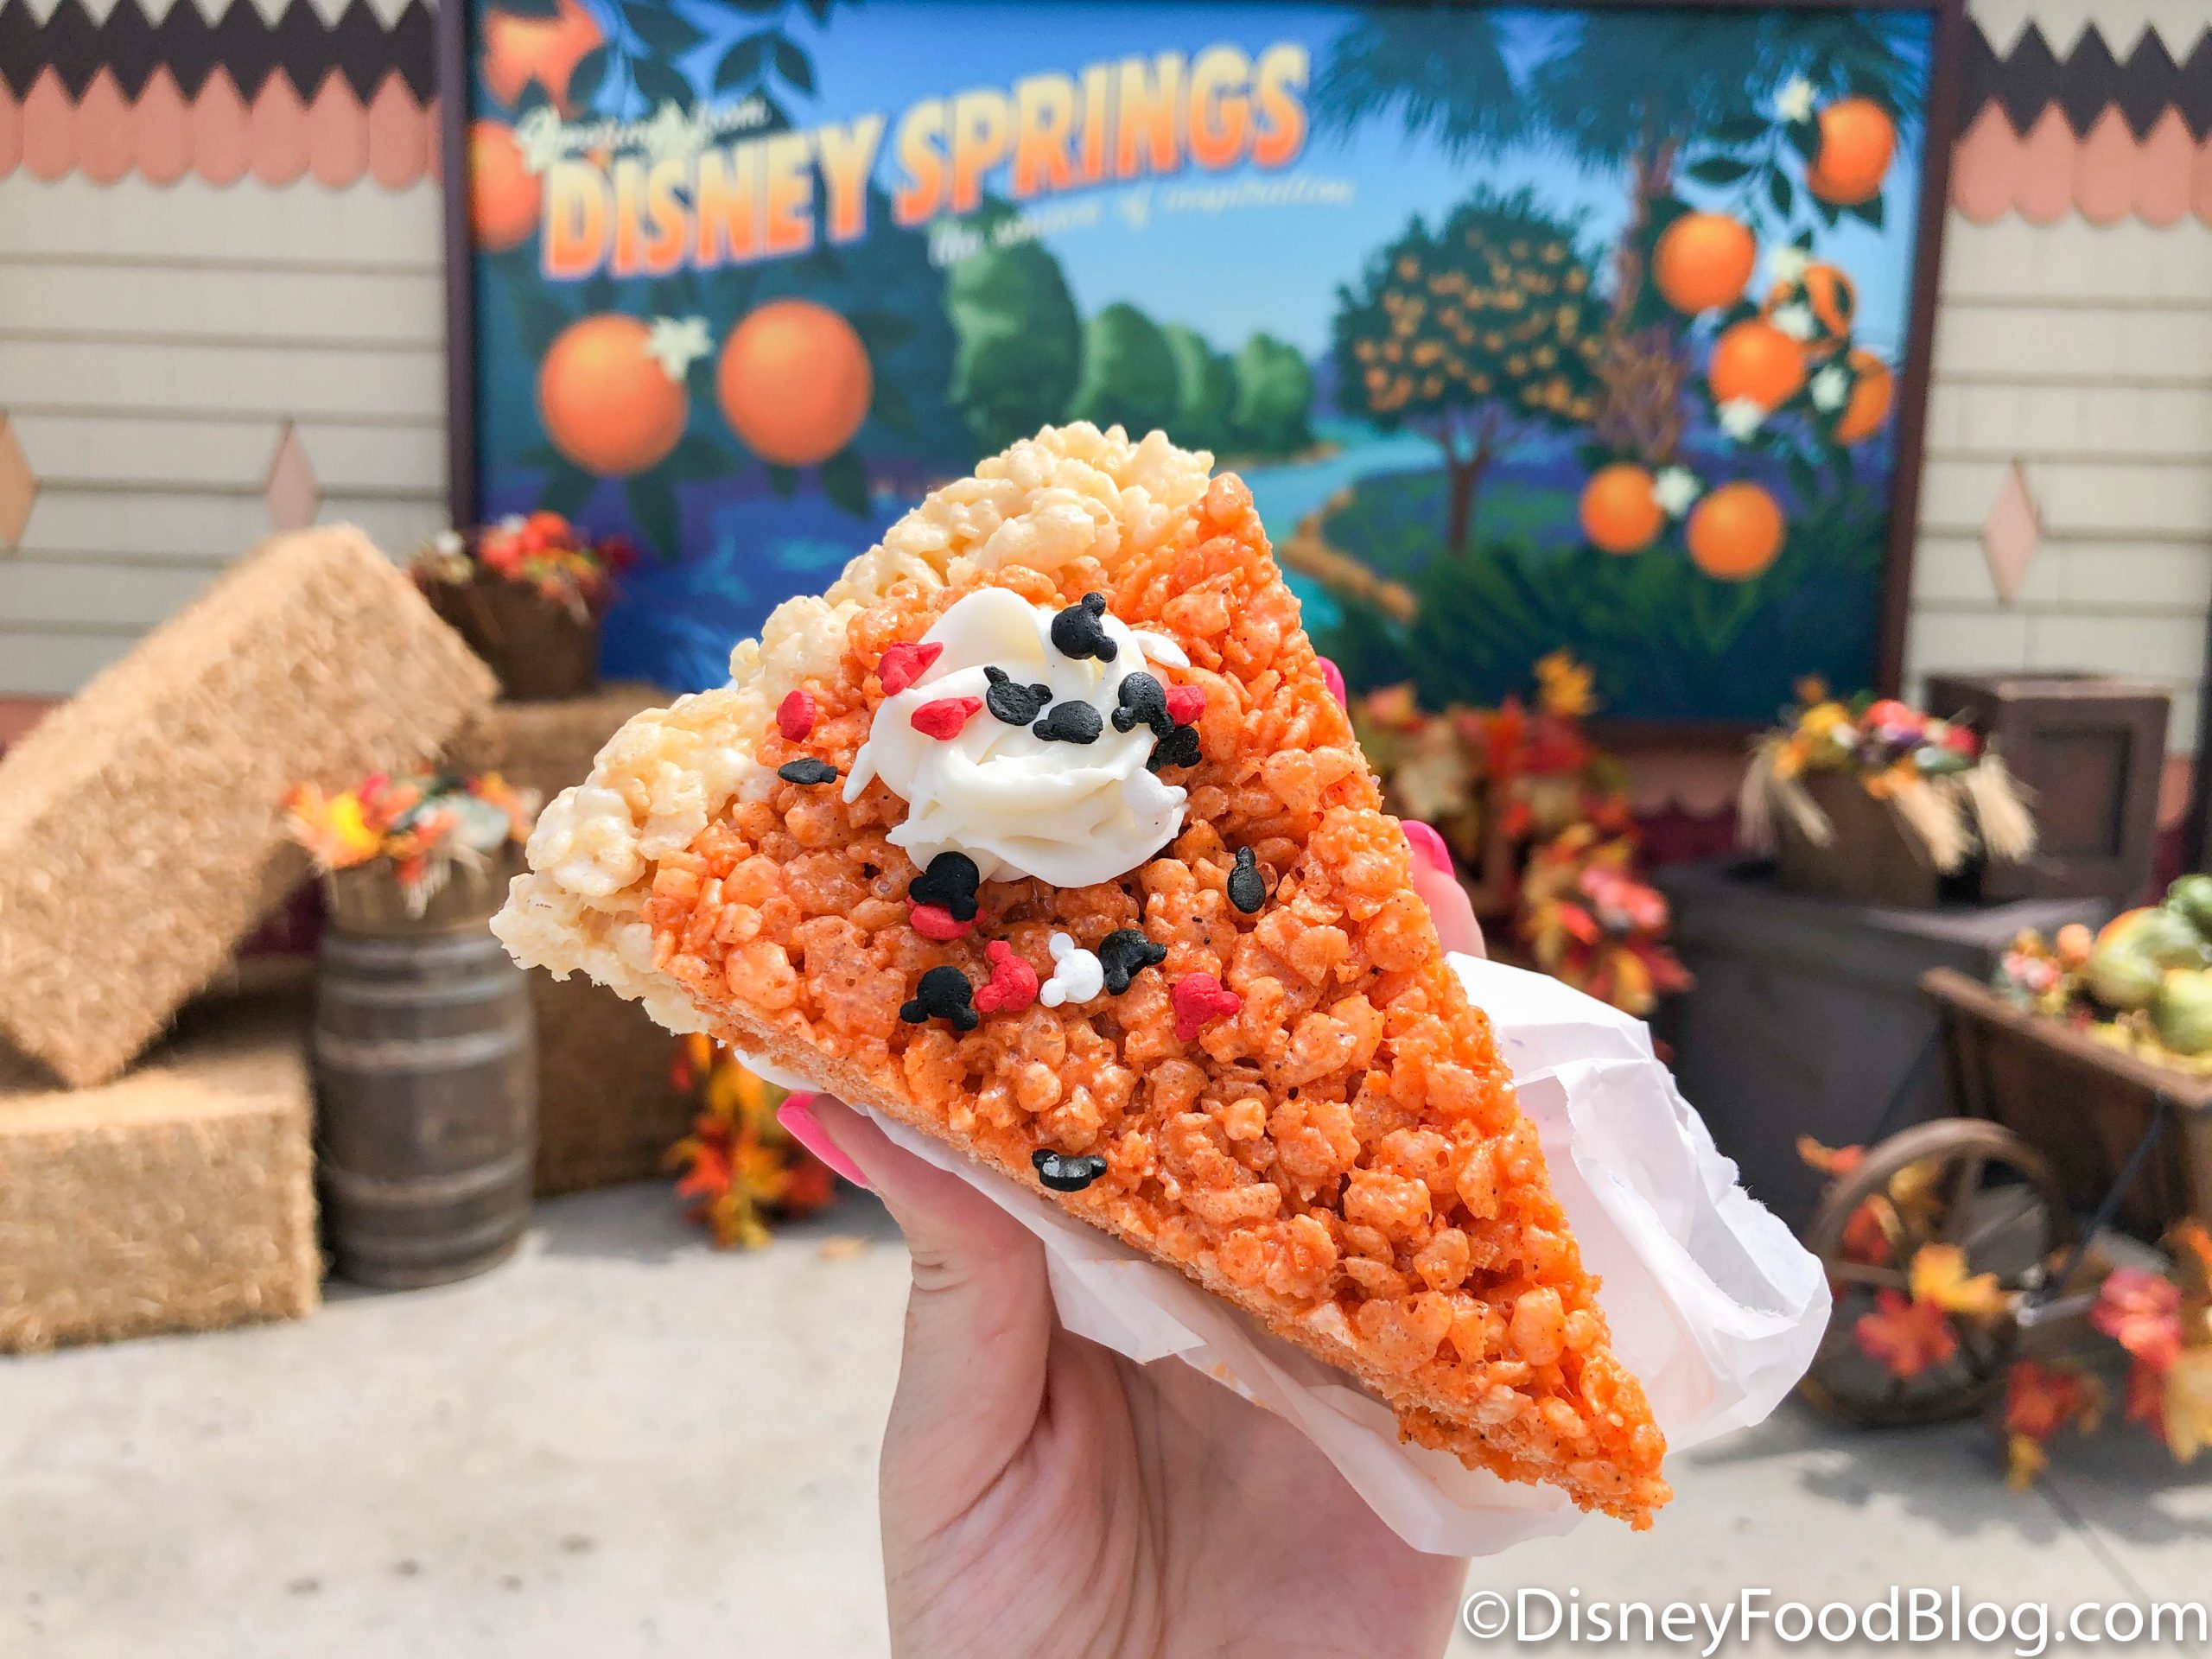 DFB Video: Latest Disney News: NEW Halloween Snacks, Water Parks are